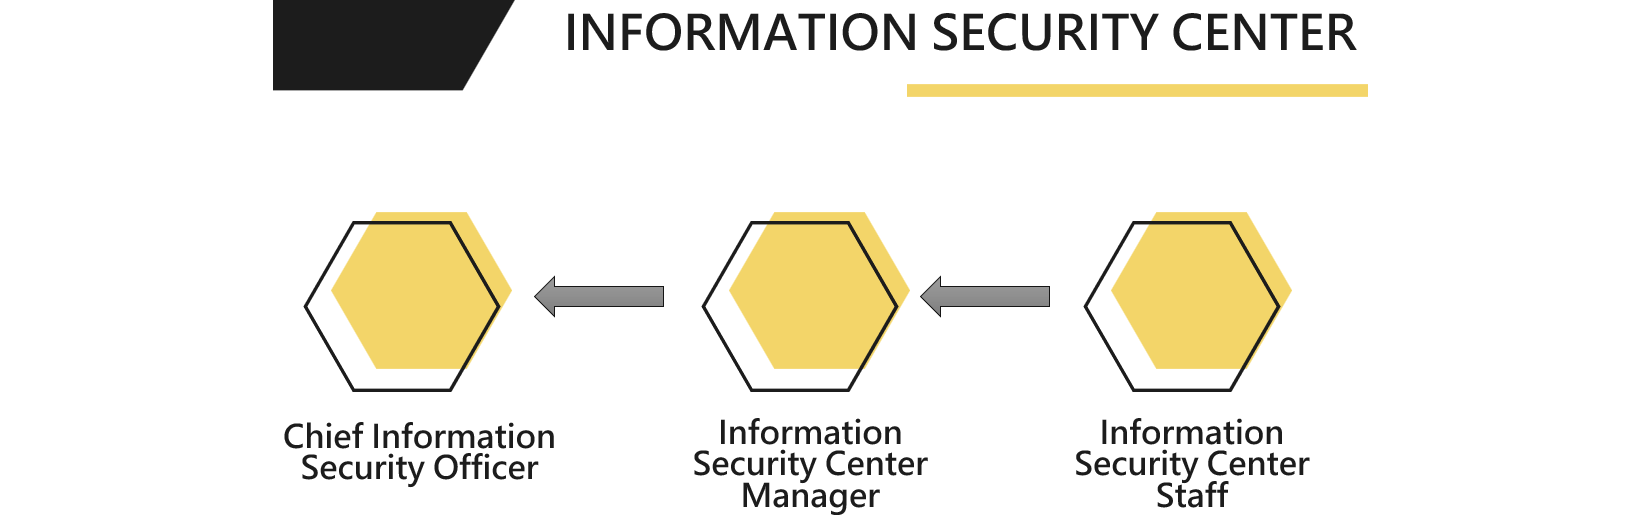 Information Security Center